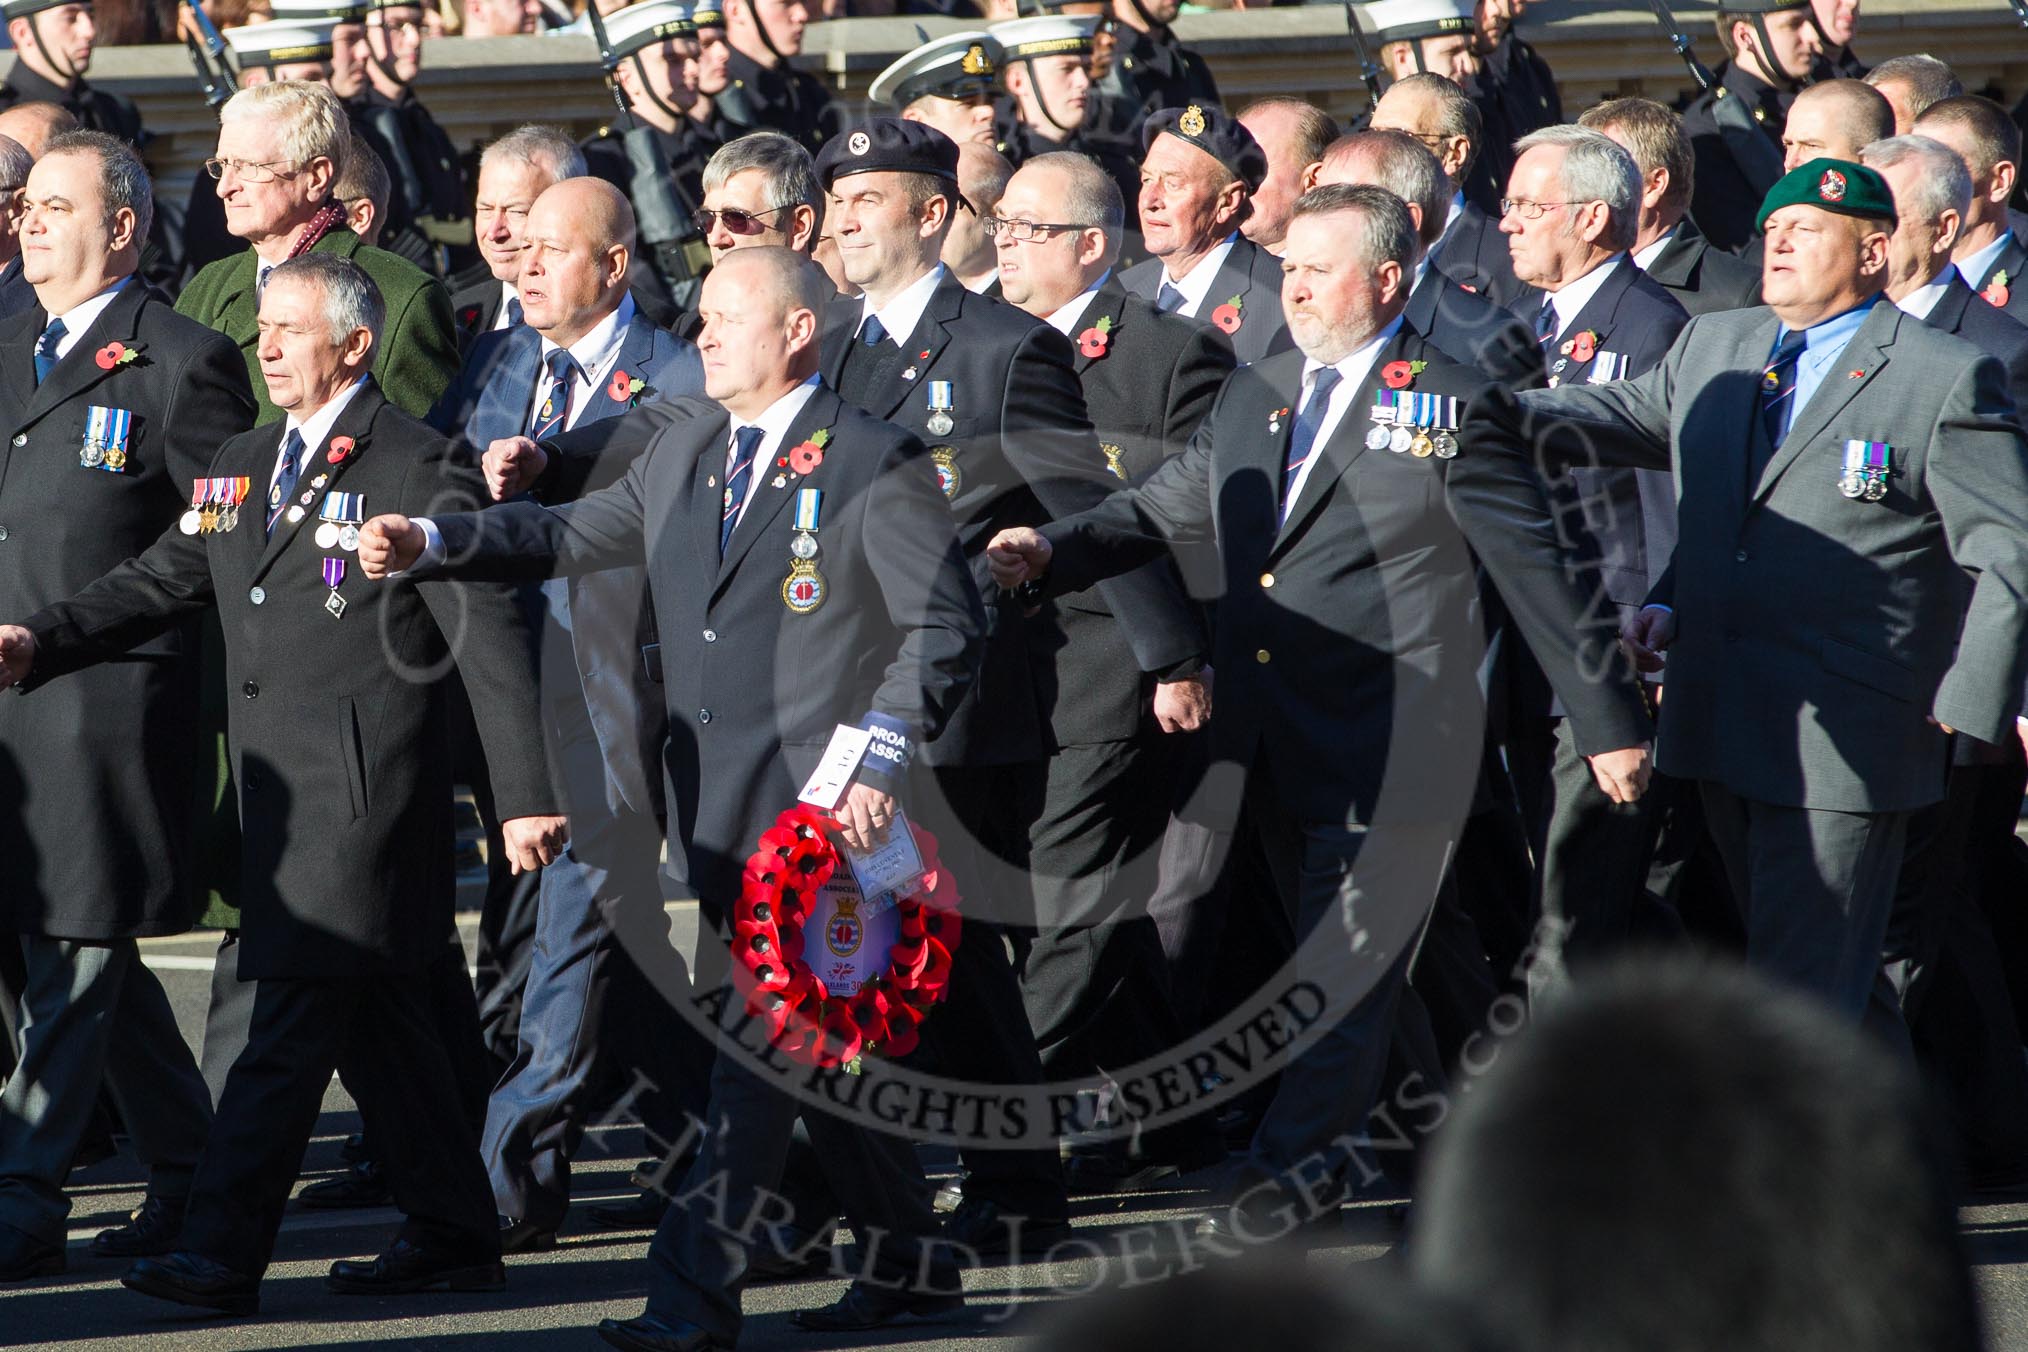 Remembrance Sunday 2012 Cenotaph March Past: Group E40 - Broadsword Association..
Whitehall, Cenotaph,
London SW1,

United Kingdom,
on 11 November 2012 at 11:42, image #289